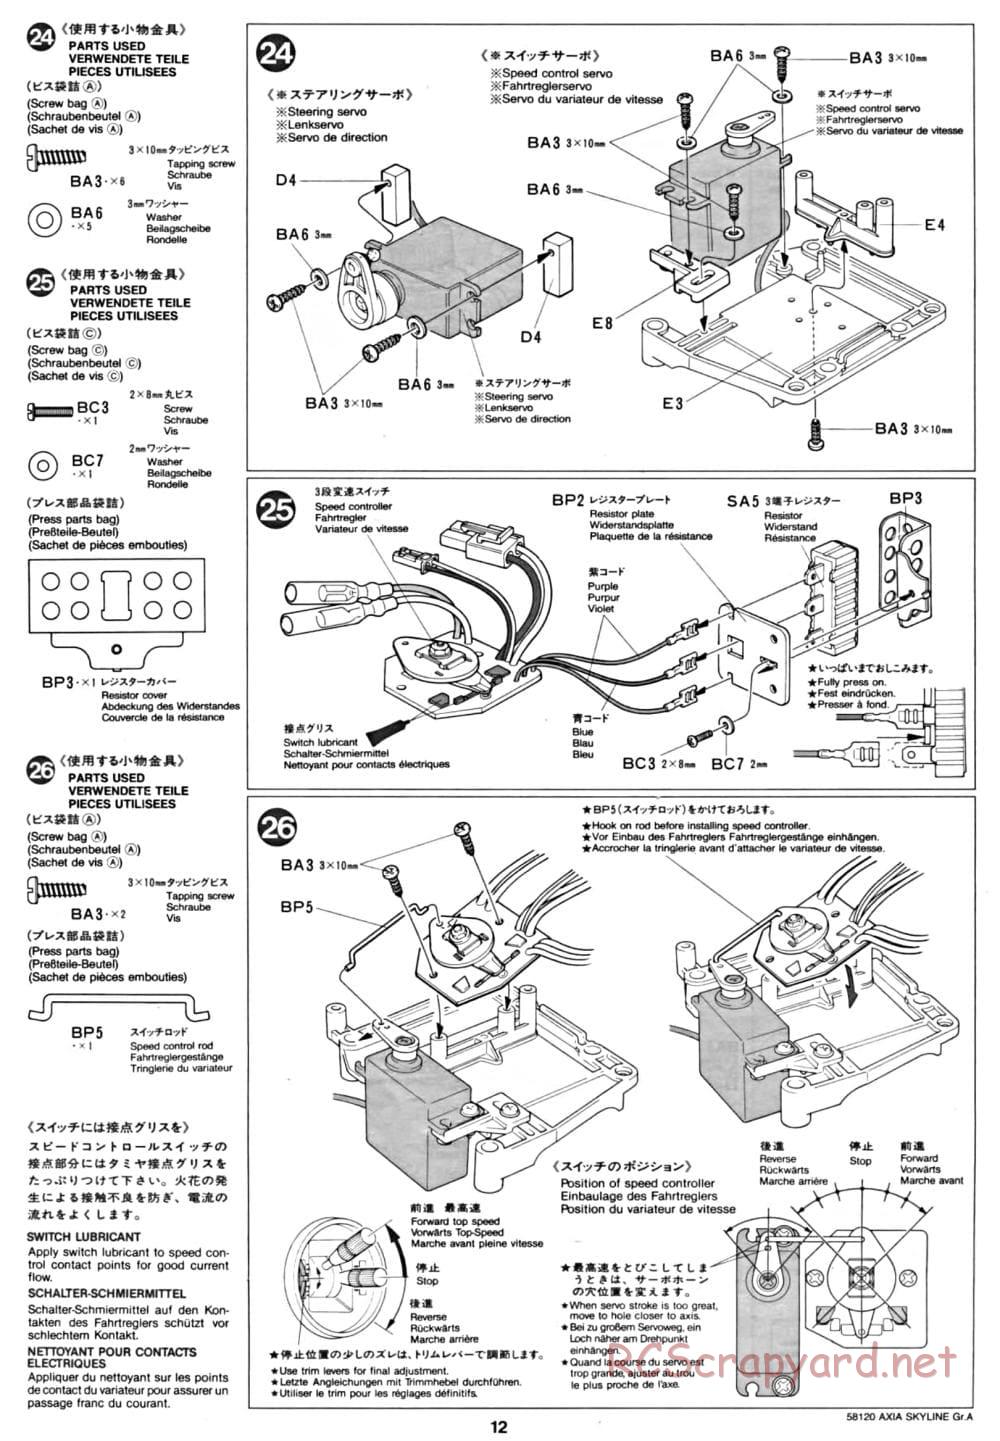 Tamiya - Axia Skyline GT-R Gr.A - TA-01 Chassis - Manual - Page 12